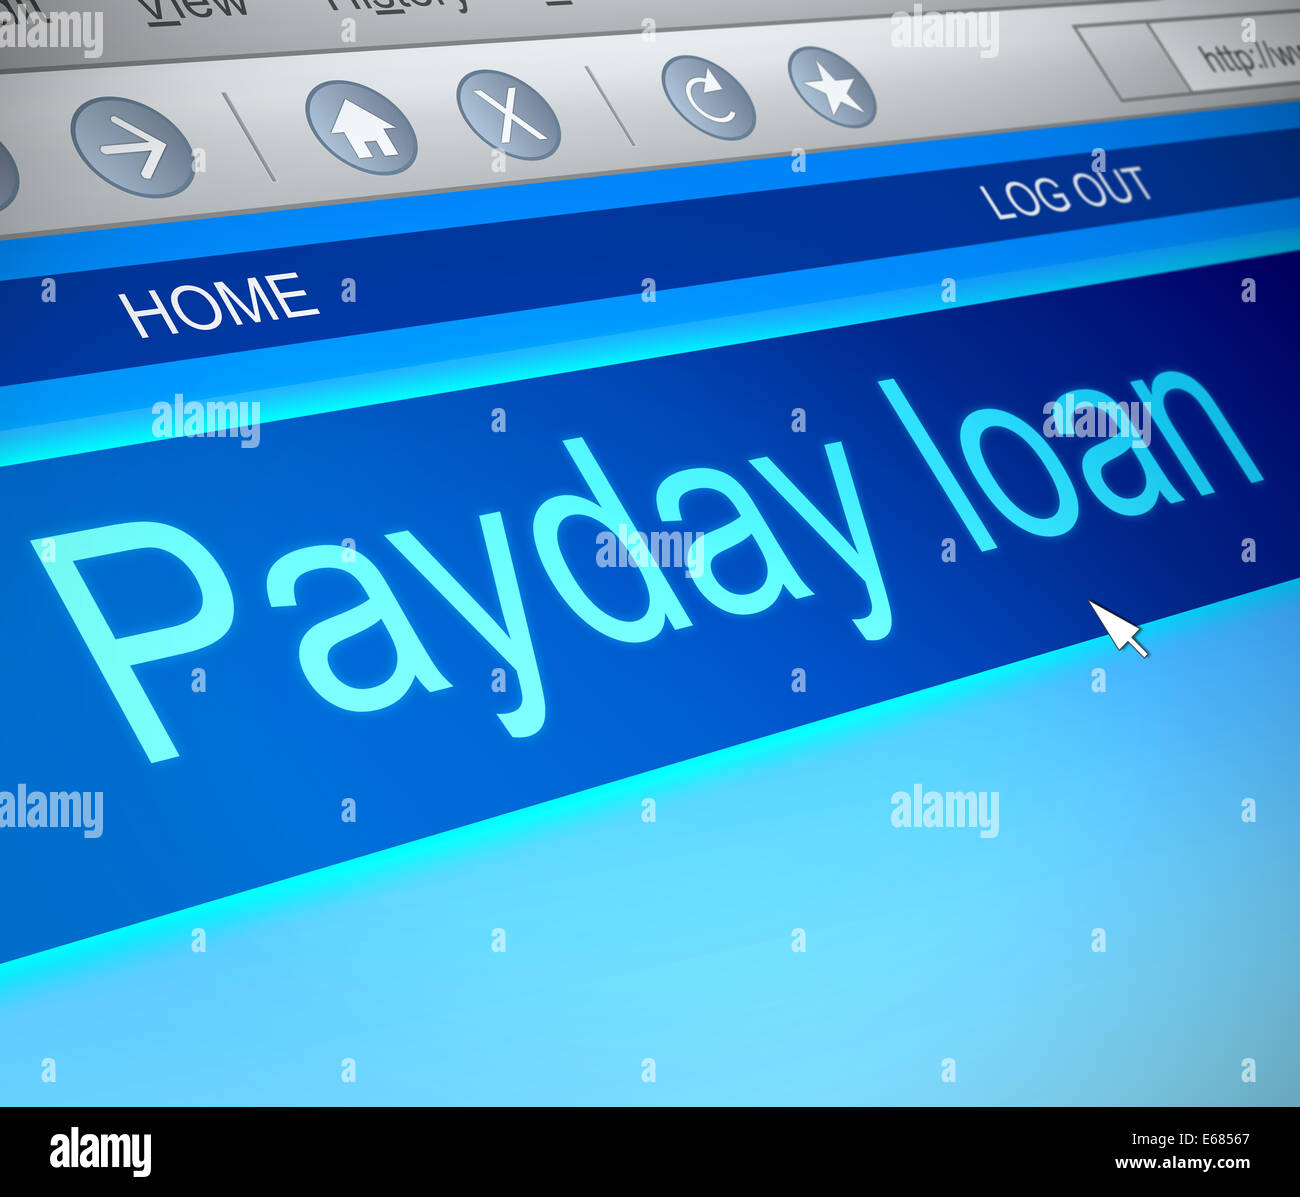 Payday Loans concetto. Foto Stock